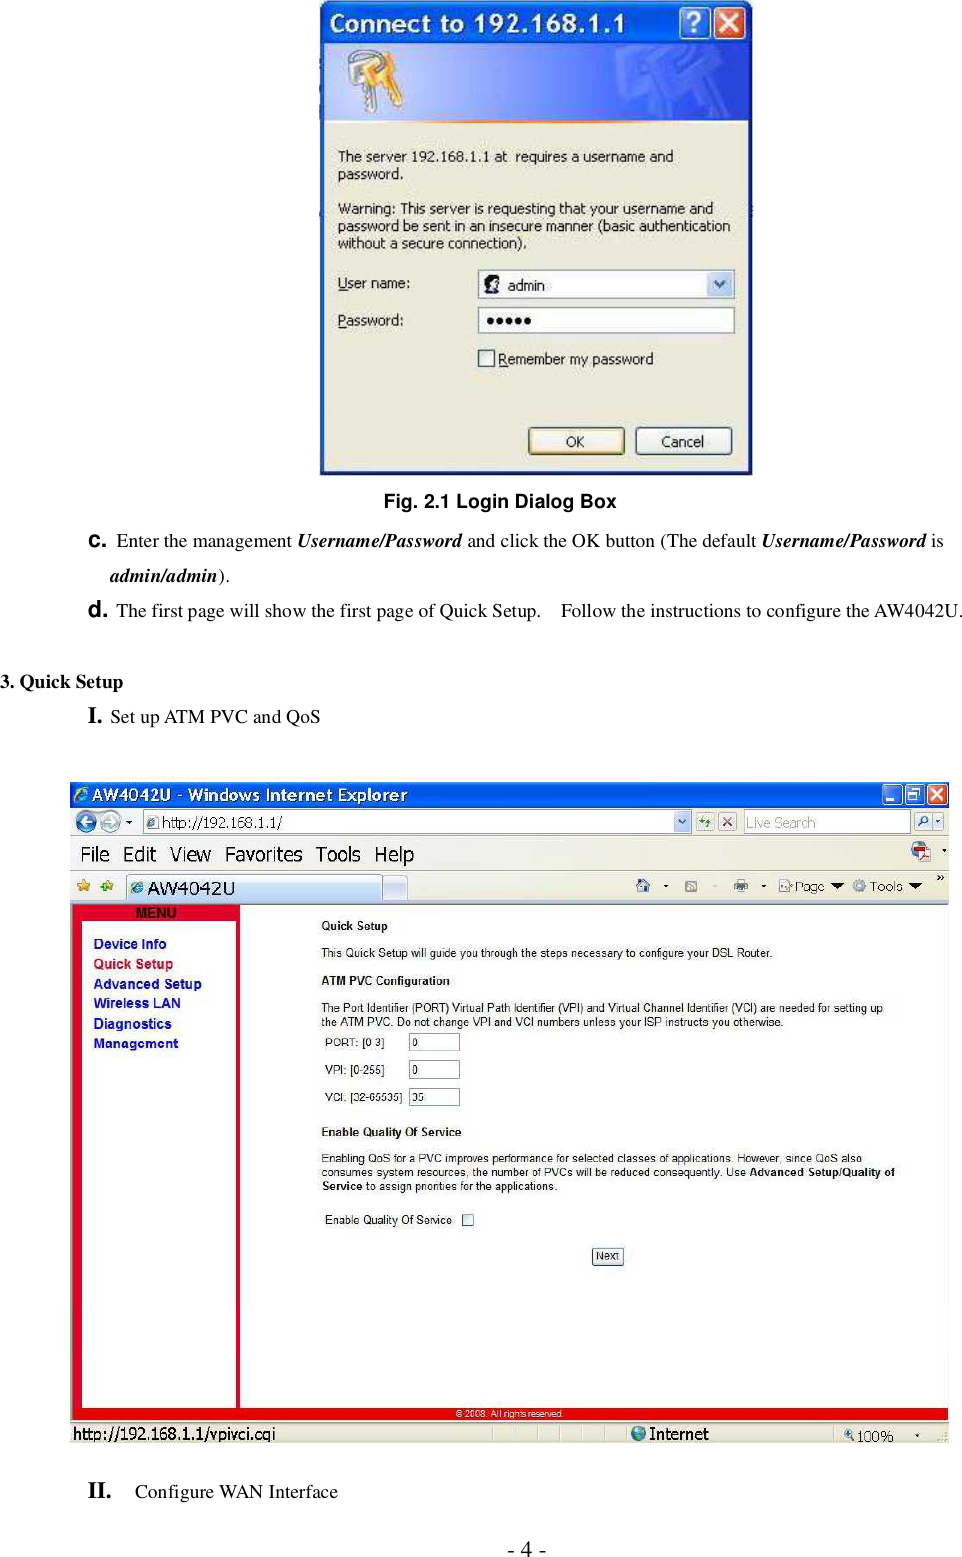 - 4 -Fig. 2.1 Login Dialog Boxc. Enter the management Username/Password and click the OK button (The default Username/Password isadmin/admin). d. The first page will show the first page of Quick Setup.  Follow the instructions to configure the AW4042U. 3. Quick Setup I. Set up ATM PVC and QoS II. Configure WAN Interface 